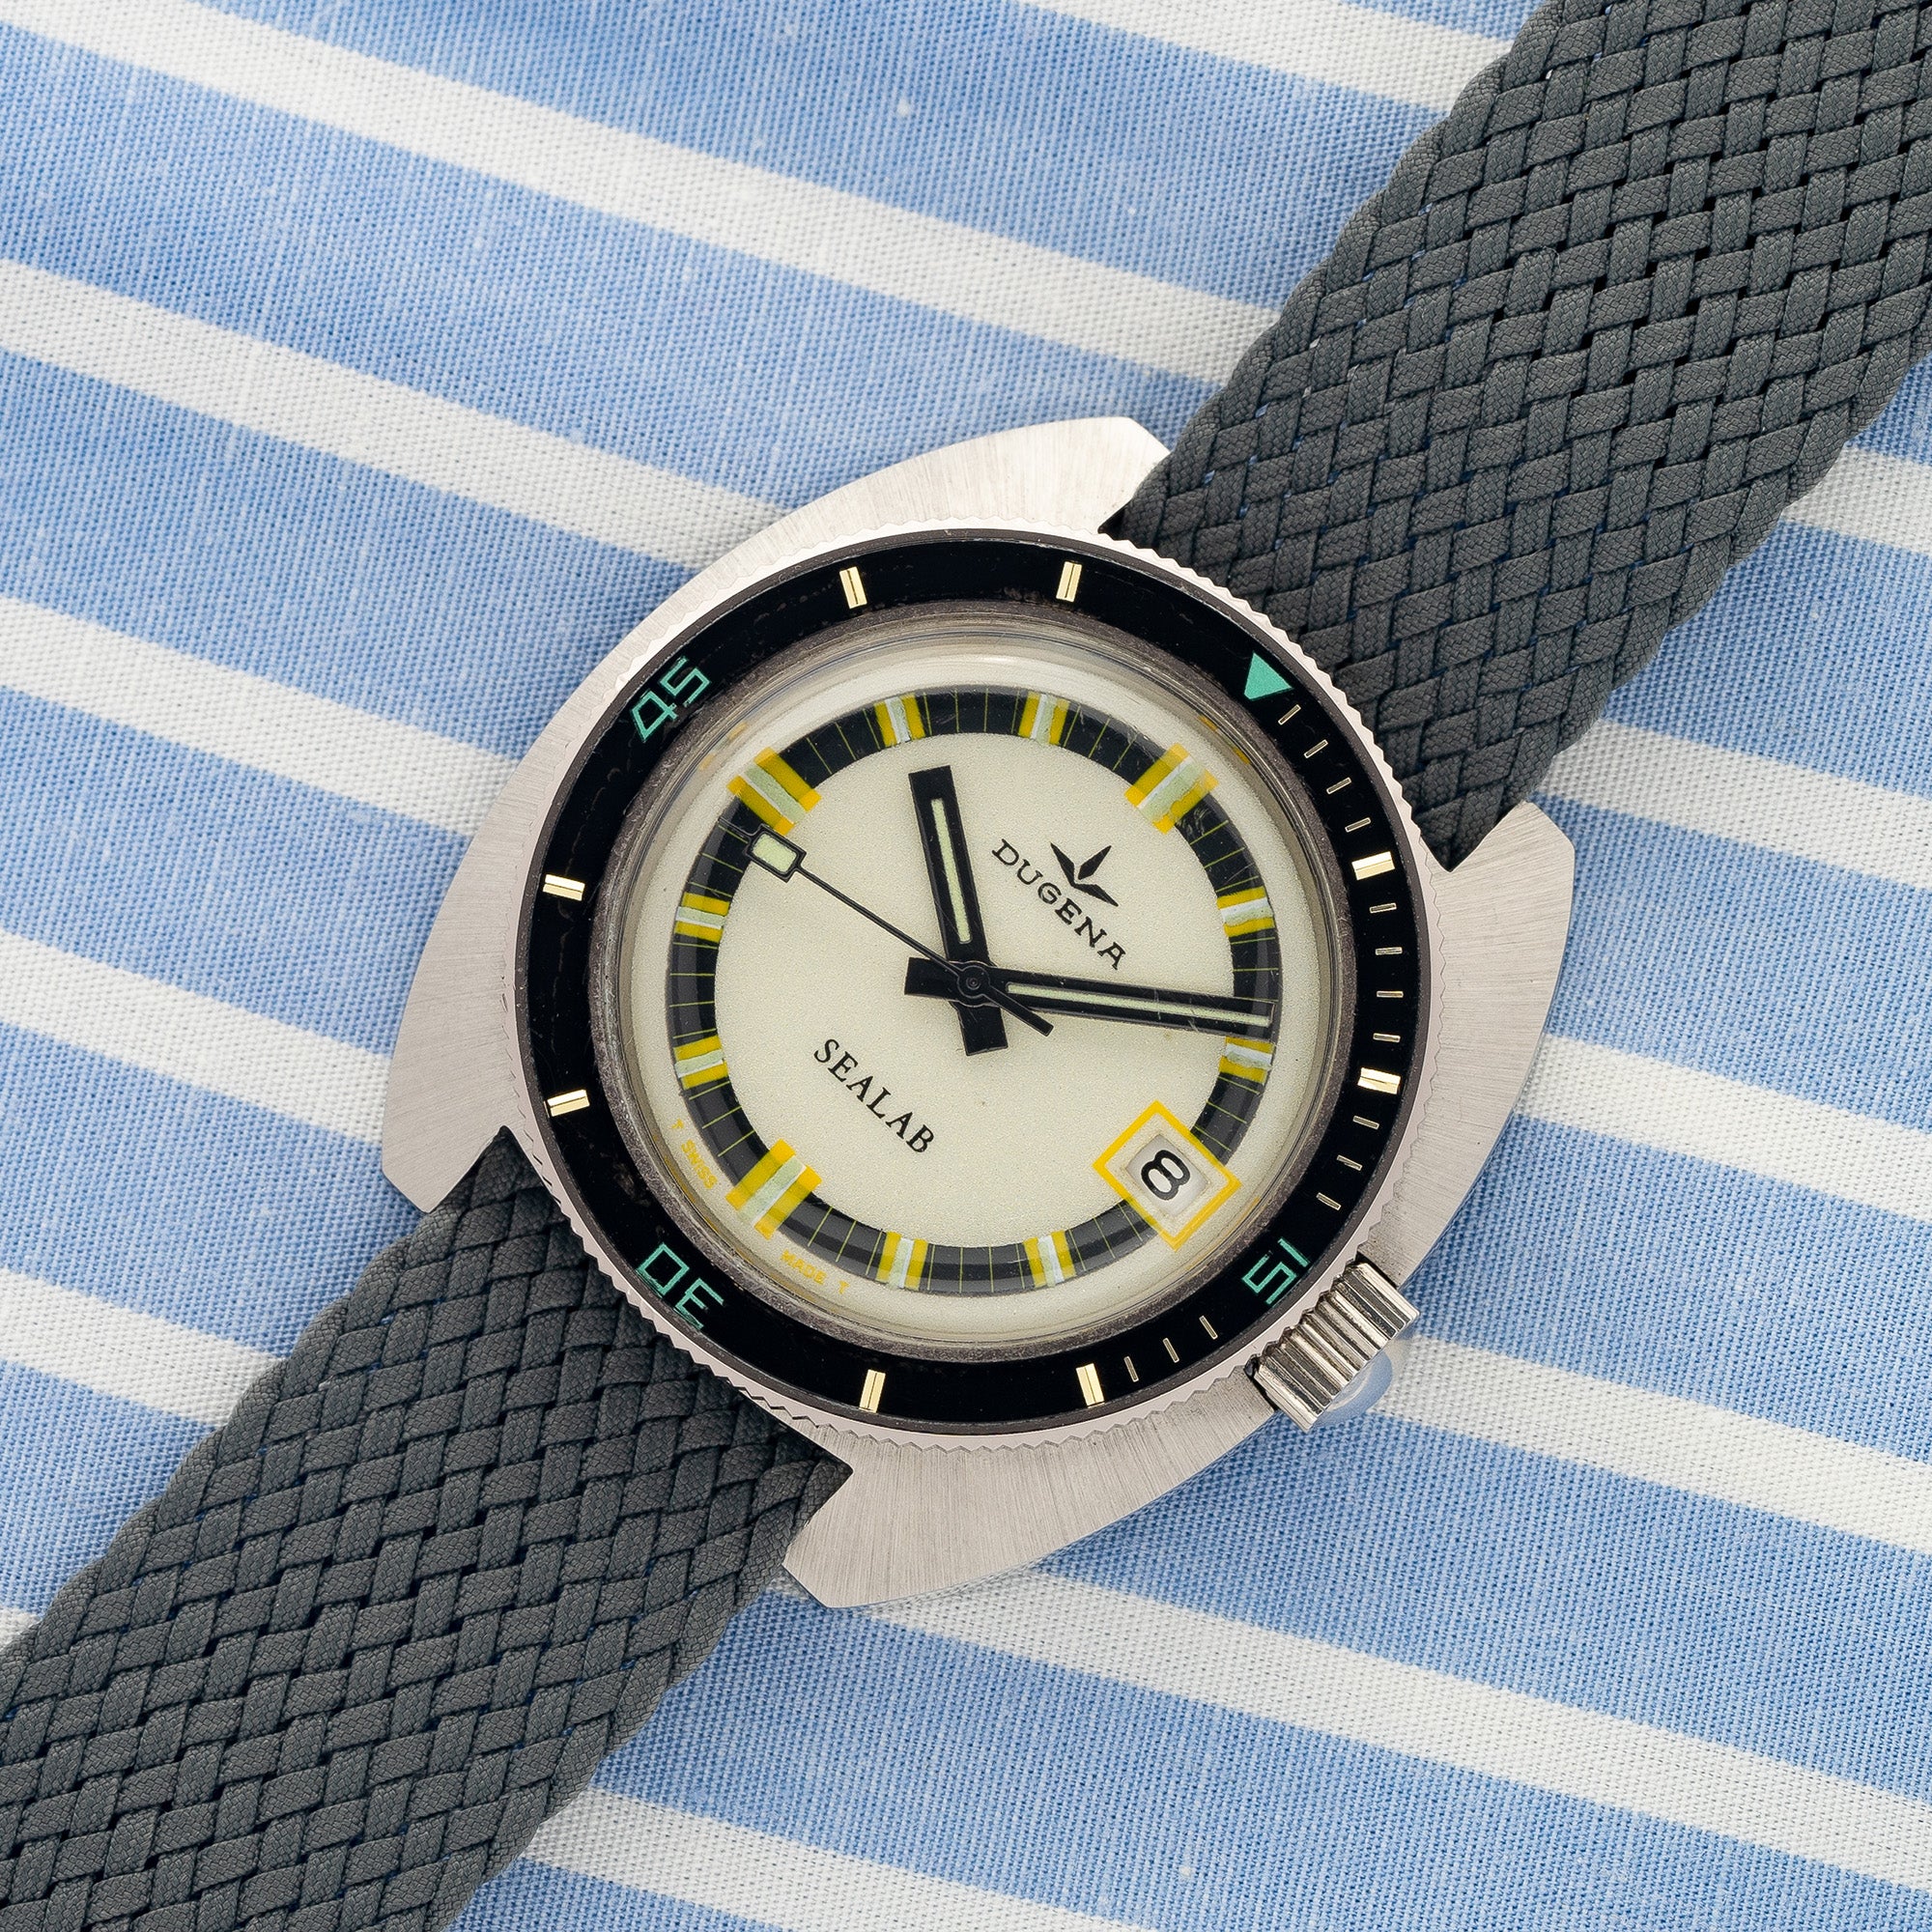 Dugena "Sealab" Skin Diver - "Pearl" White Dial - Very Rare - *Unpolished*